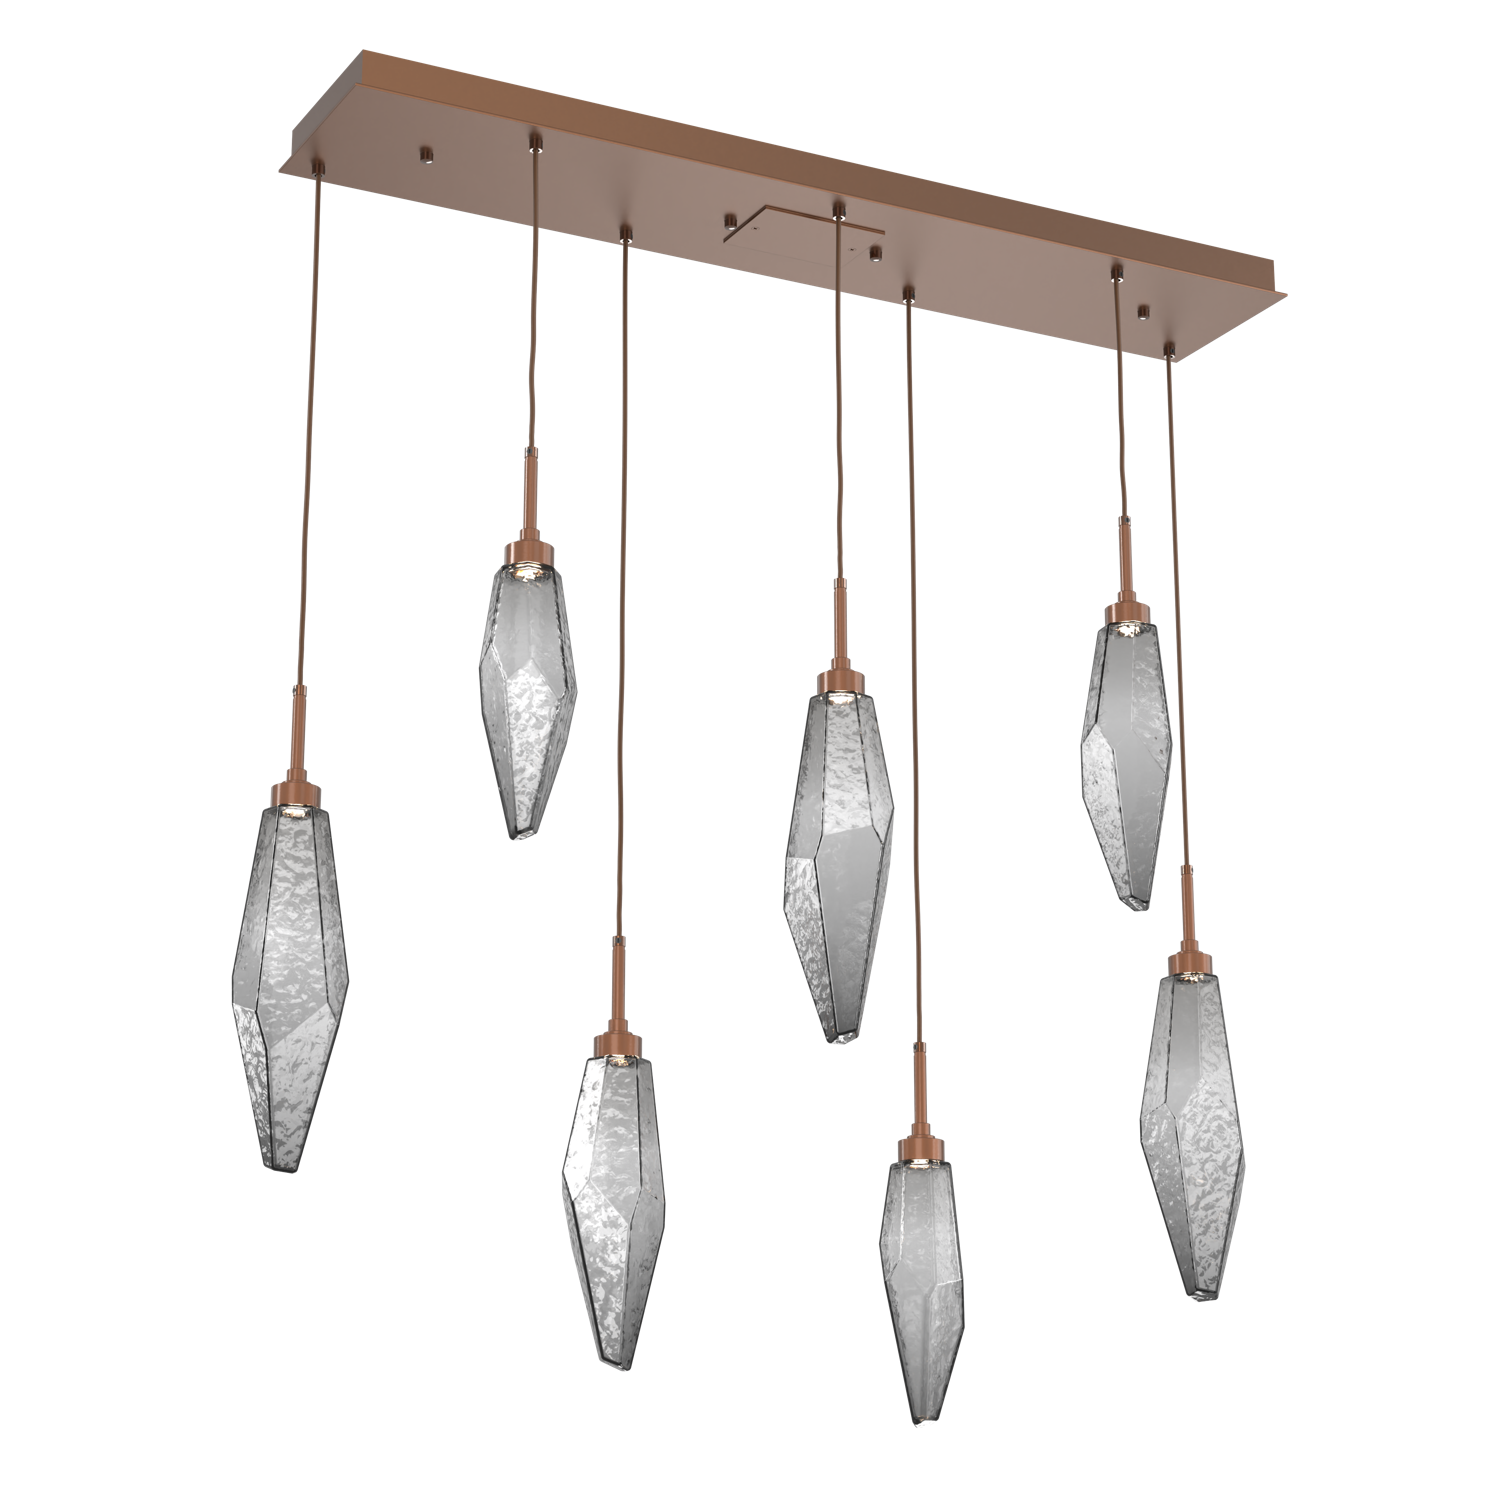 PLB0050-07-BB-CS-Hammerton-Studio-Rock-Crystal-7-light-linear-pendant-chandelier-with-burnished-bronze-finish-and-chilled-smoke-glass-shades-and-LED-lamping